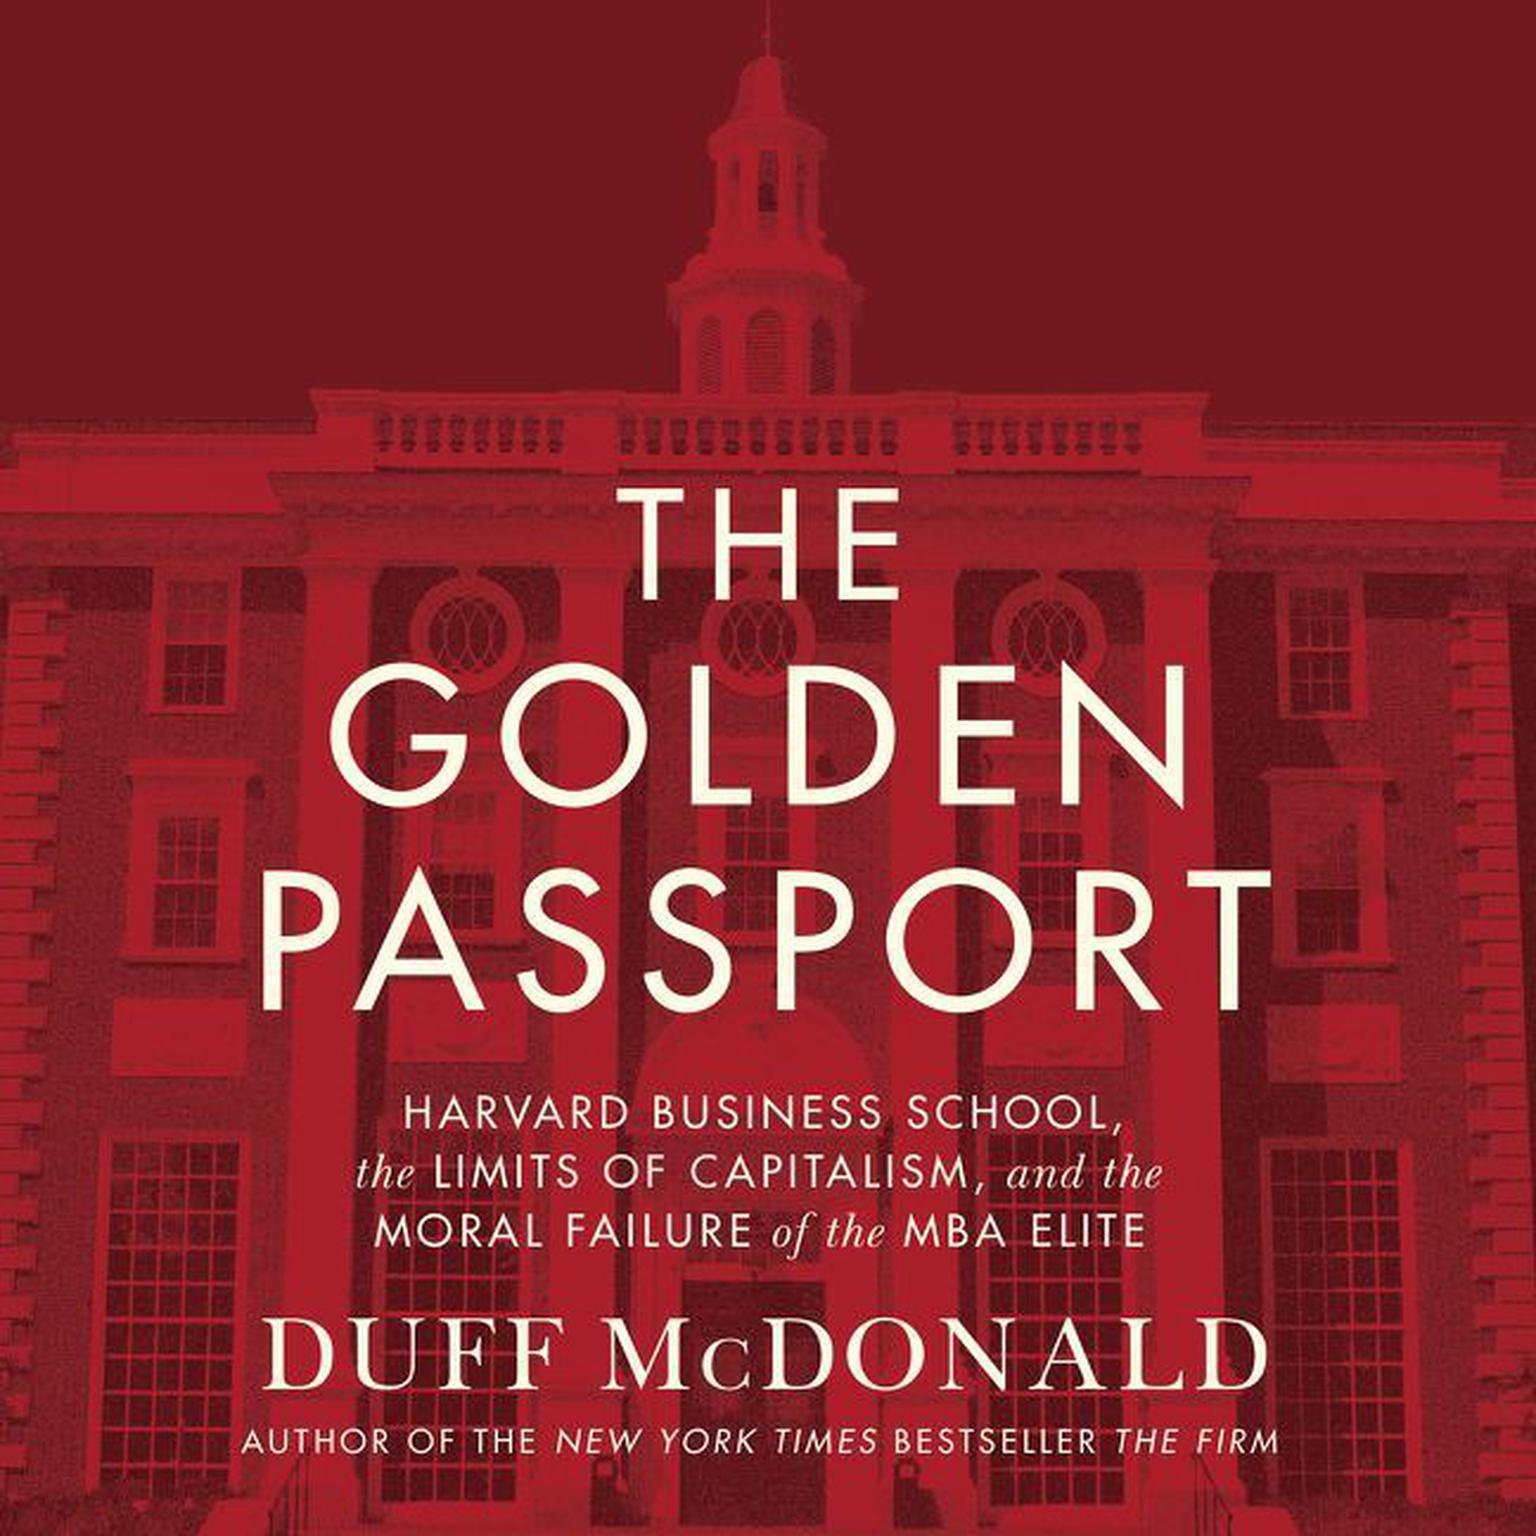 The Golden Passport: Harvard Business School, the Limits of Capitalism, and the Moral Failure of the MBA Elite Audiobook, by Duff McDonald